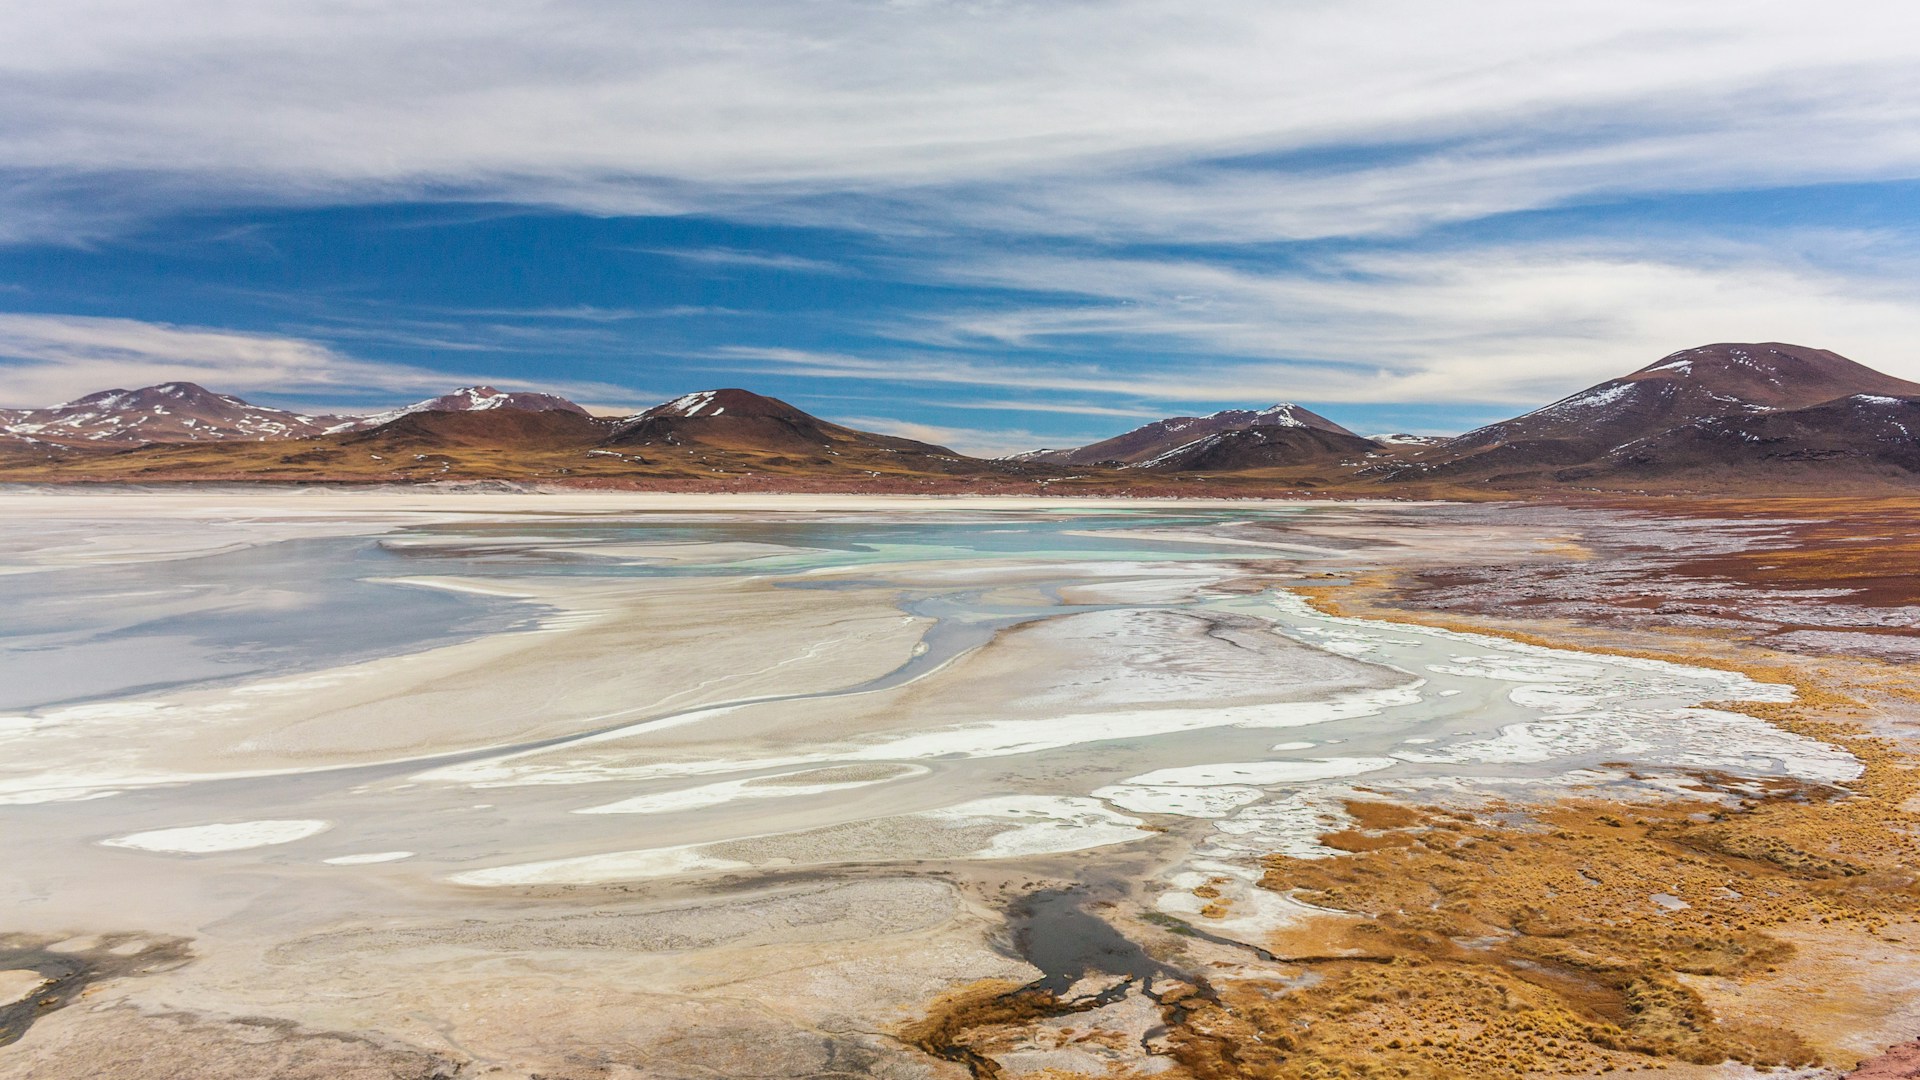 Lithium Prices Show Signs of Life and Could Inspire New Investments, Yet EV Prospects Remain Problematic